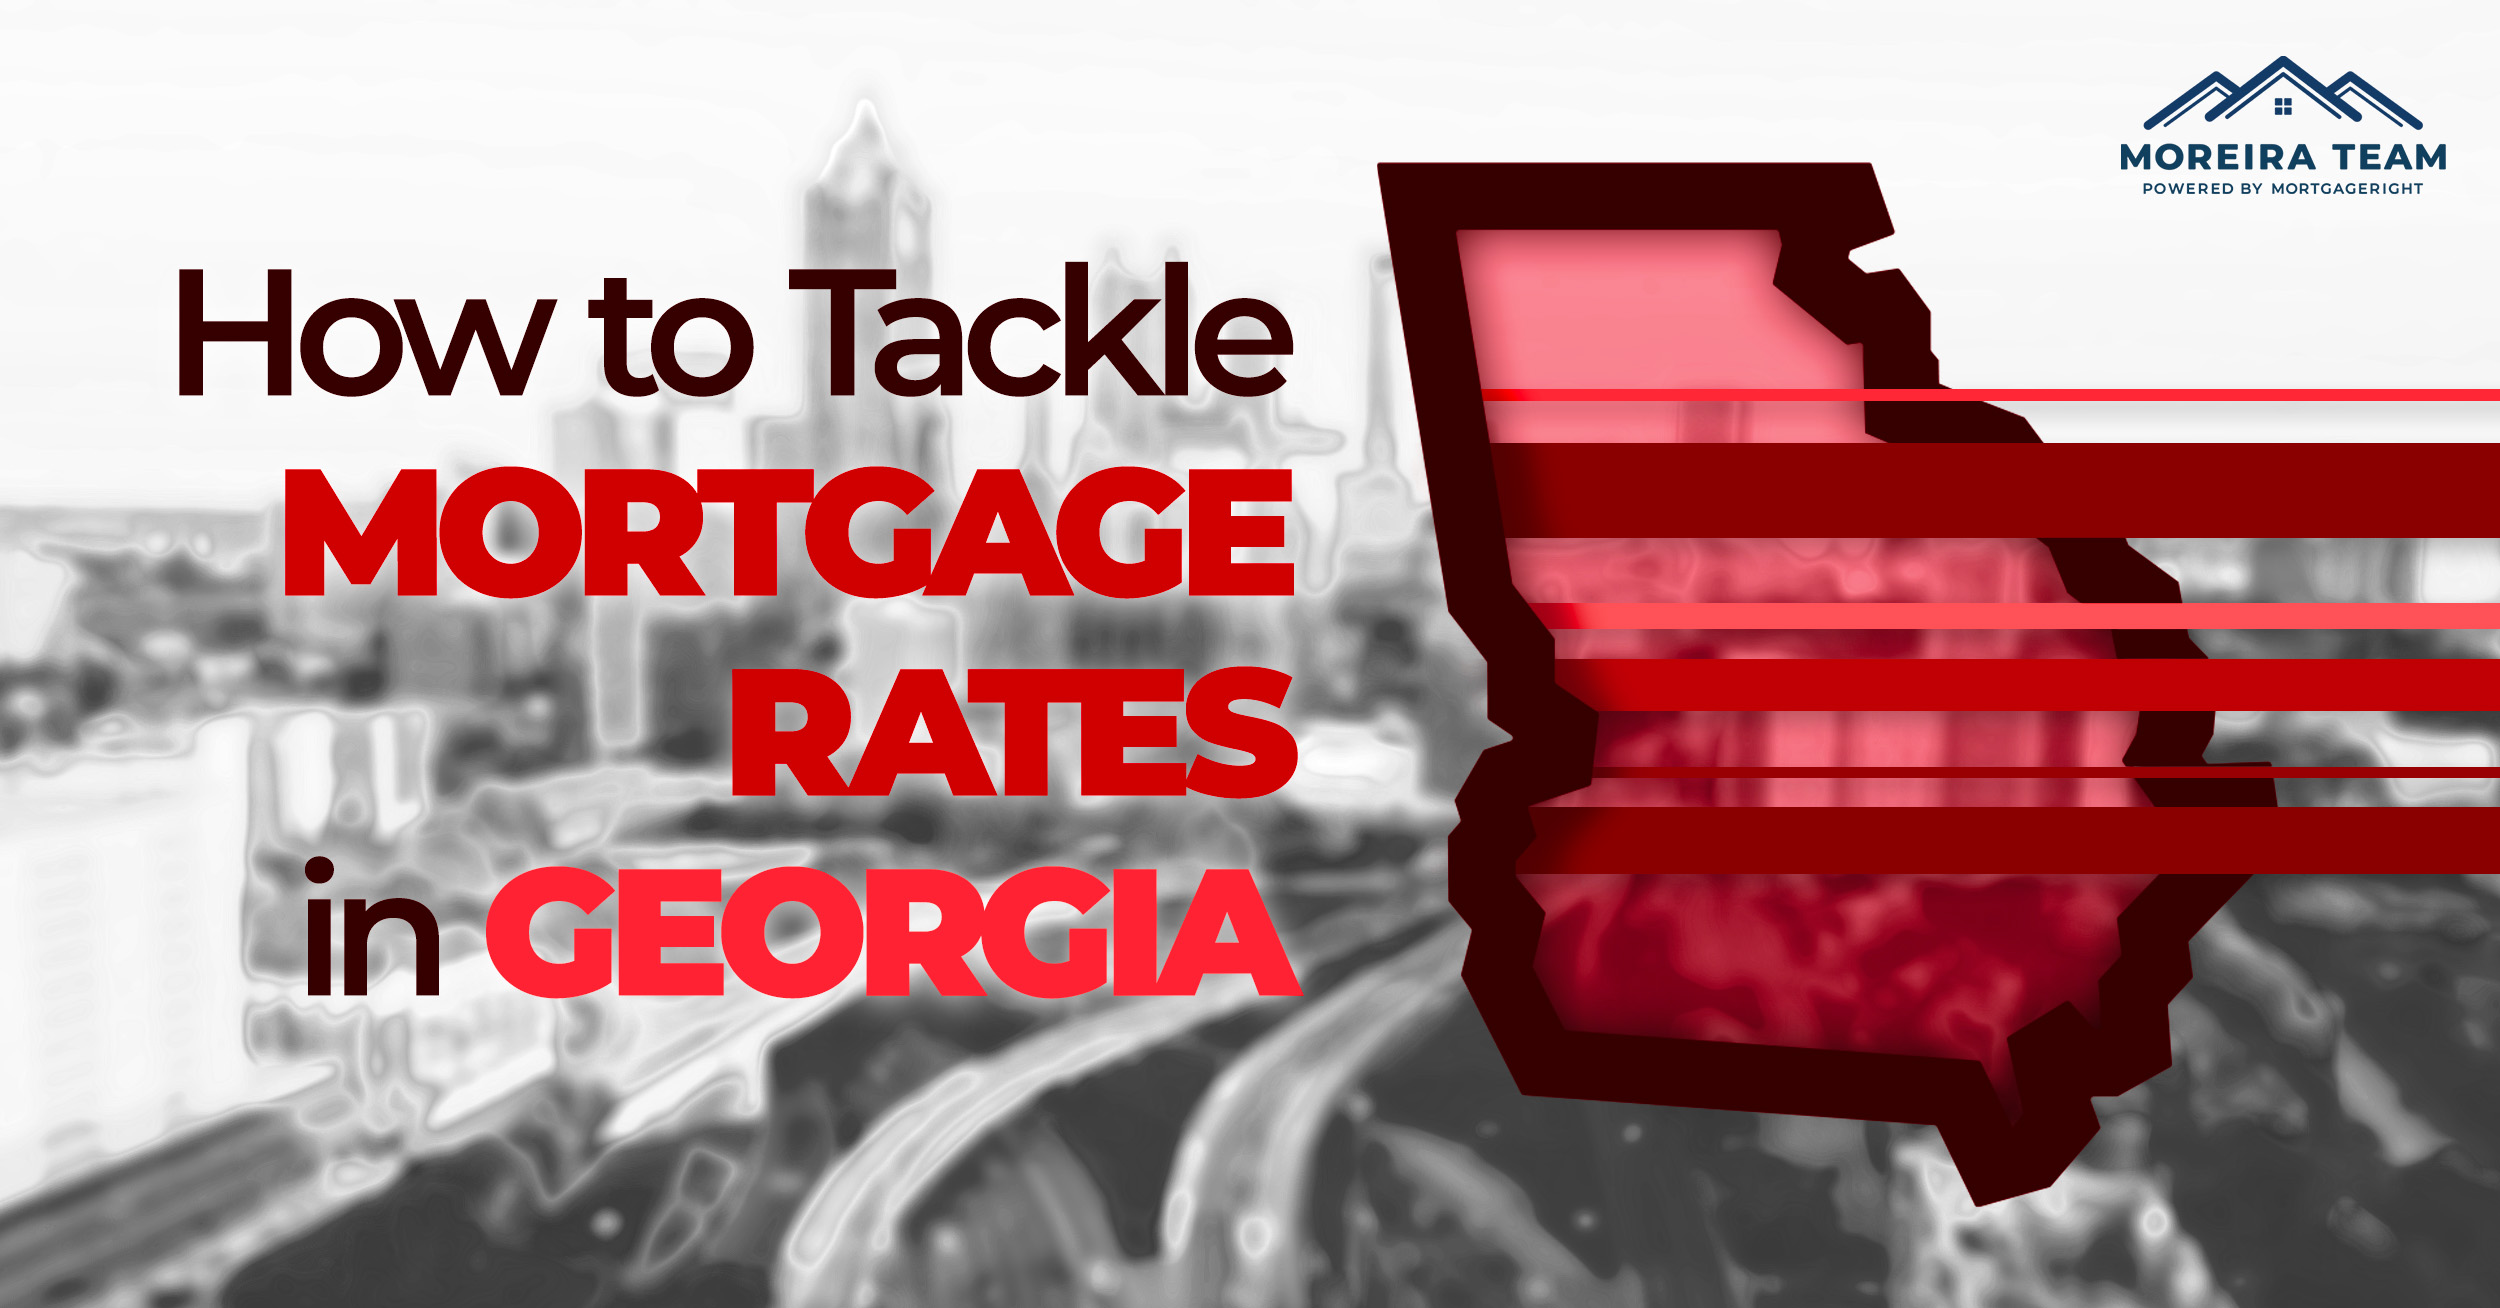 How a Dream Team Helps You Tackle Mortgage Rates in Georgia